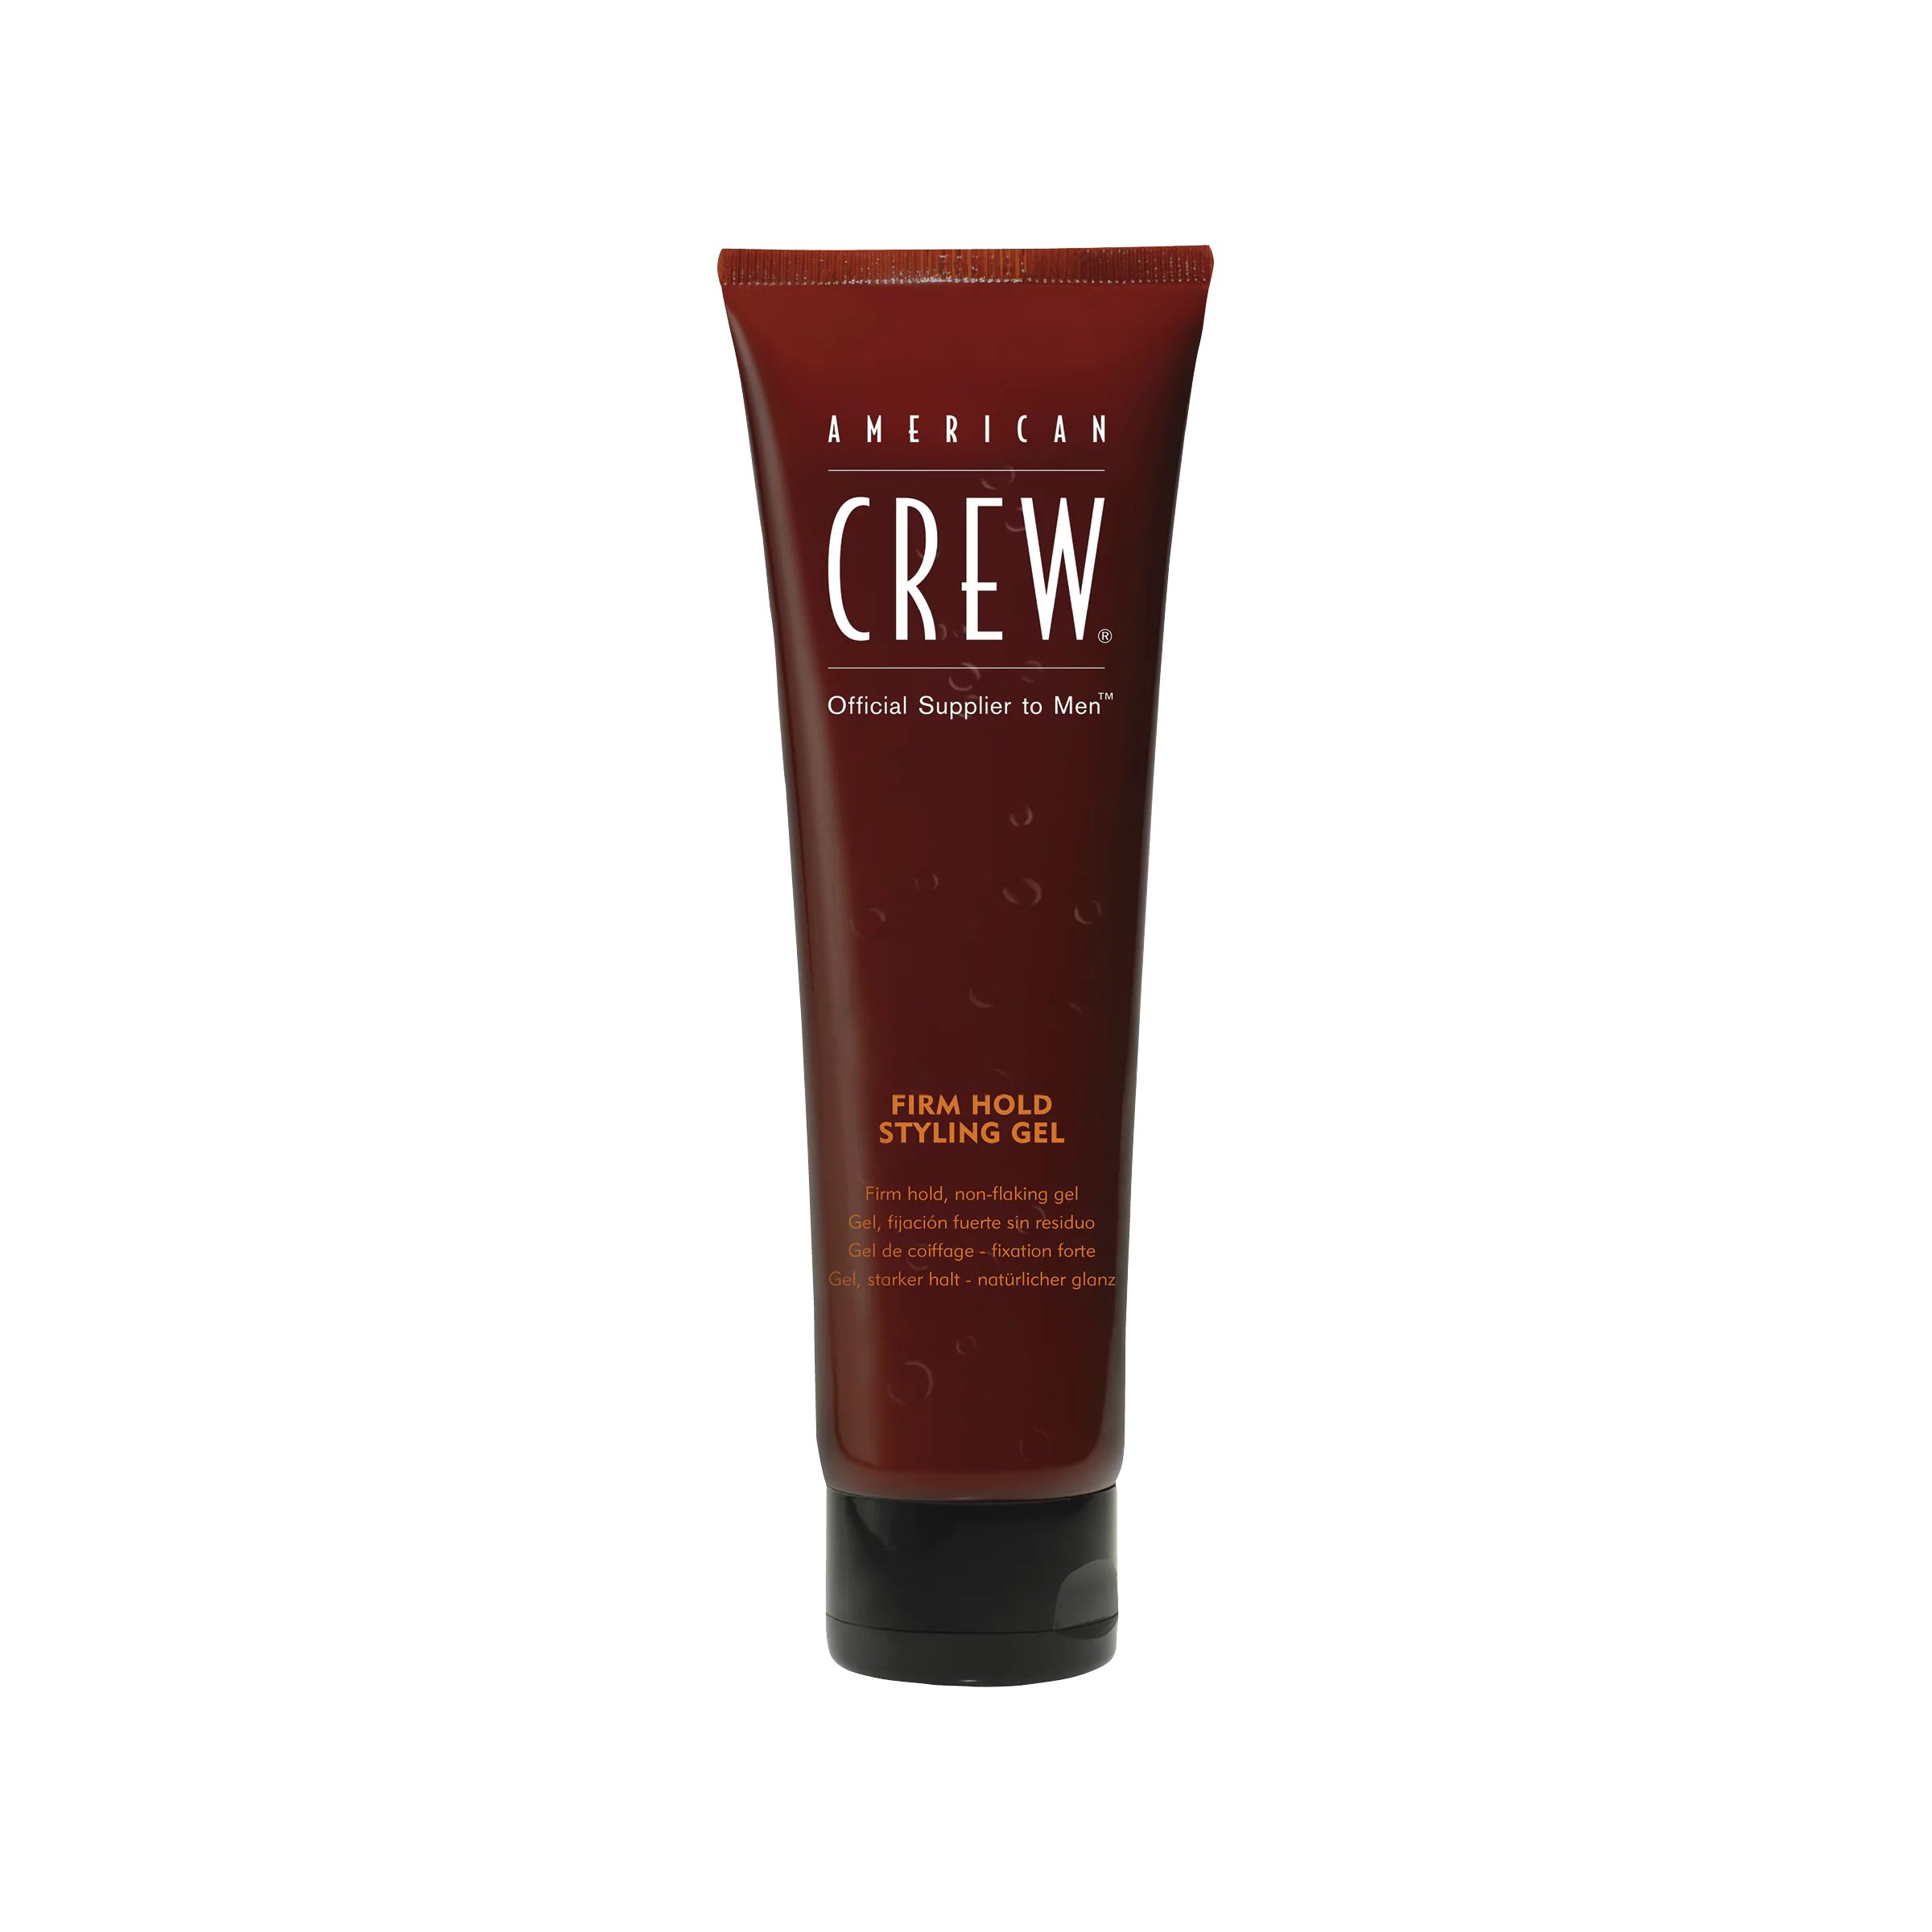 Firm-Hold Styling Gel